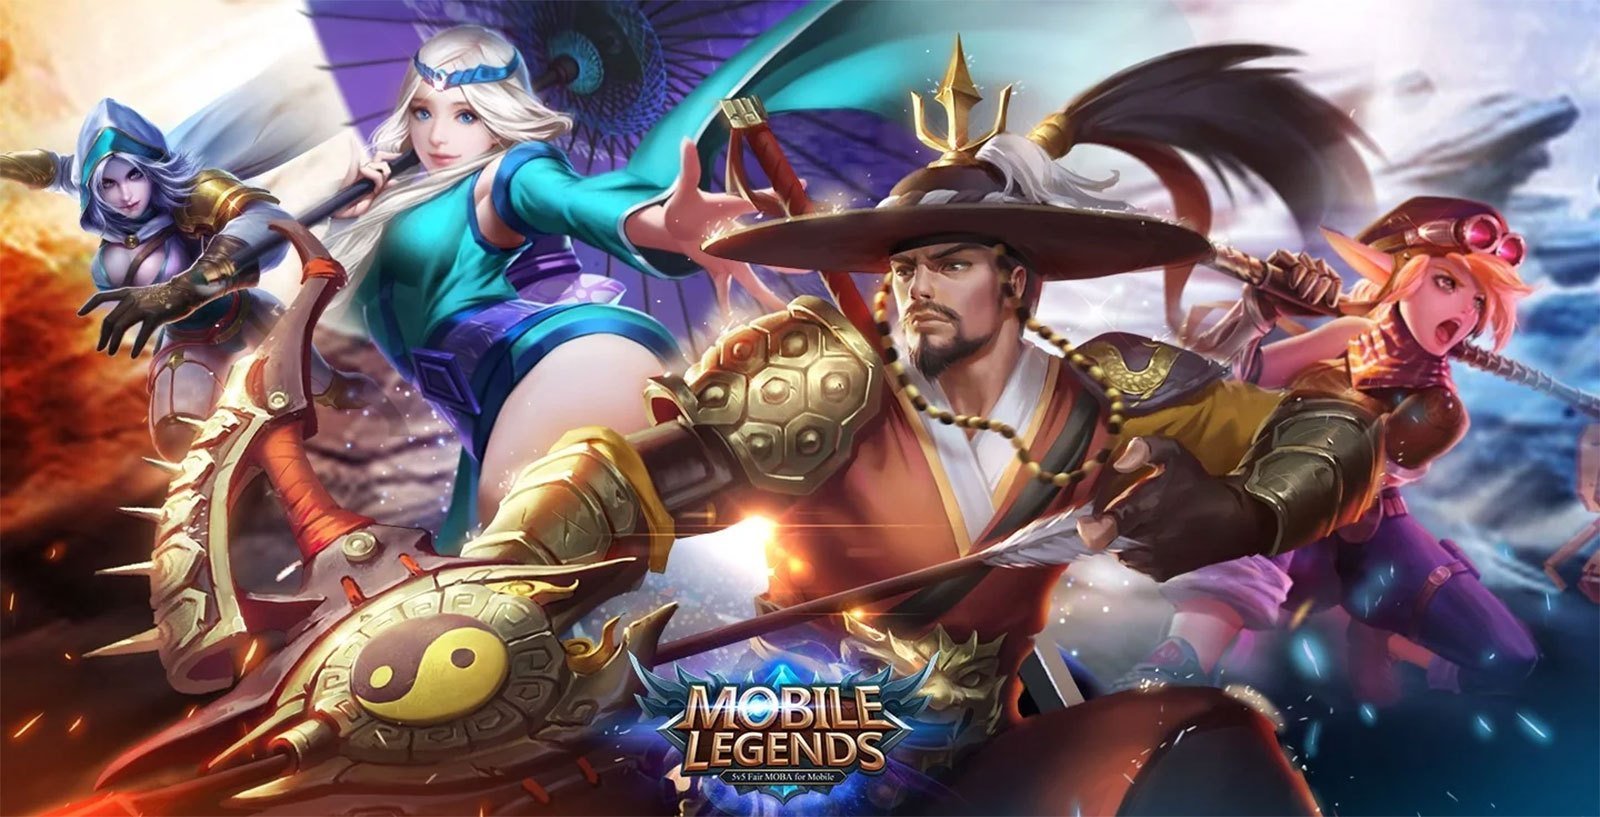 Mobile Legends - Learn These Best Strategies for Getting Free Diamonds